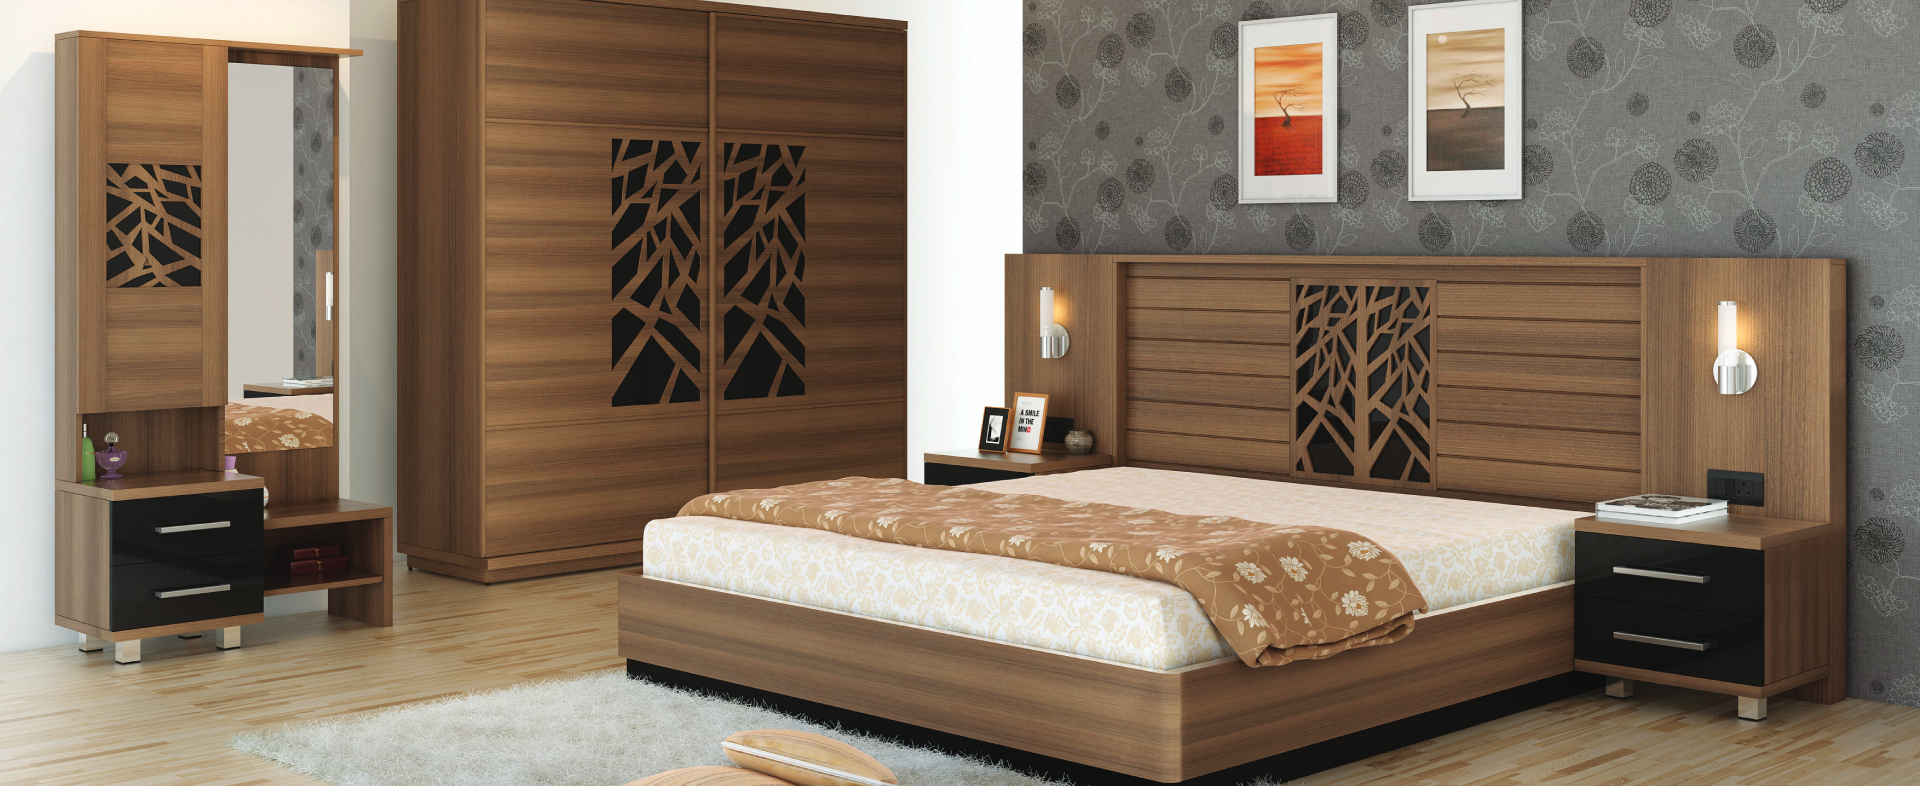 Bedroom Sets Modular Kitchens Wardrobes Living Room Bedroom pertaining to proportions 1920 X 786